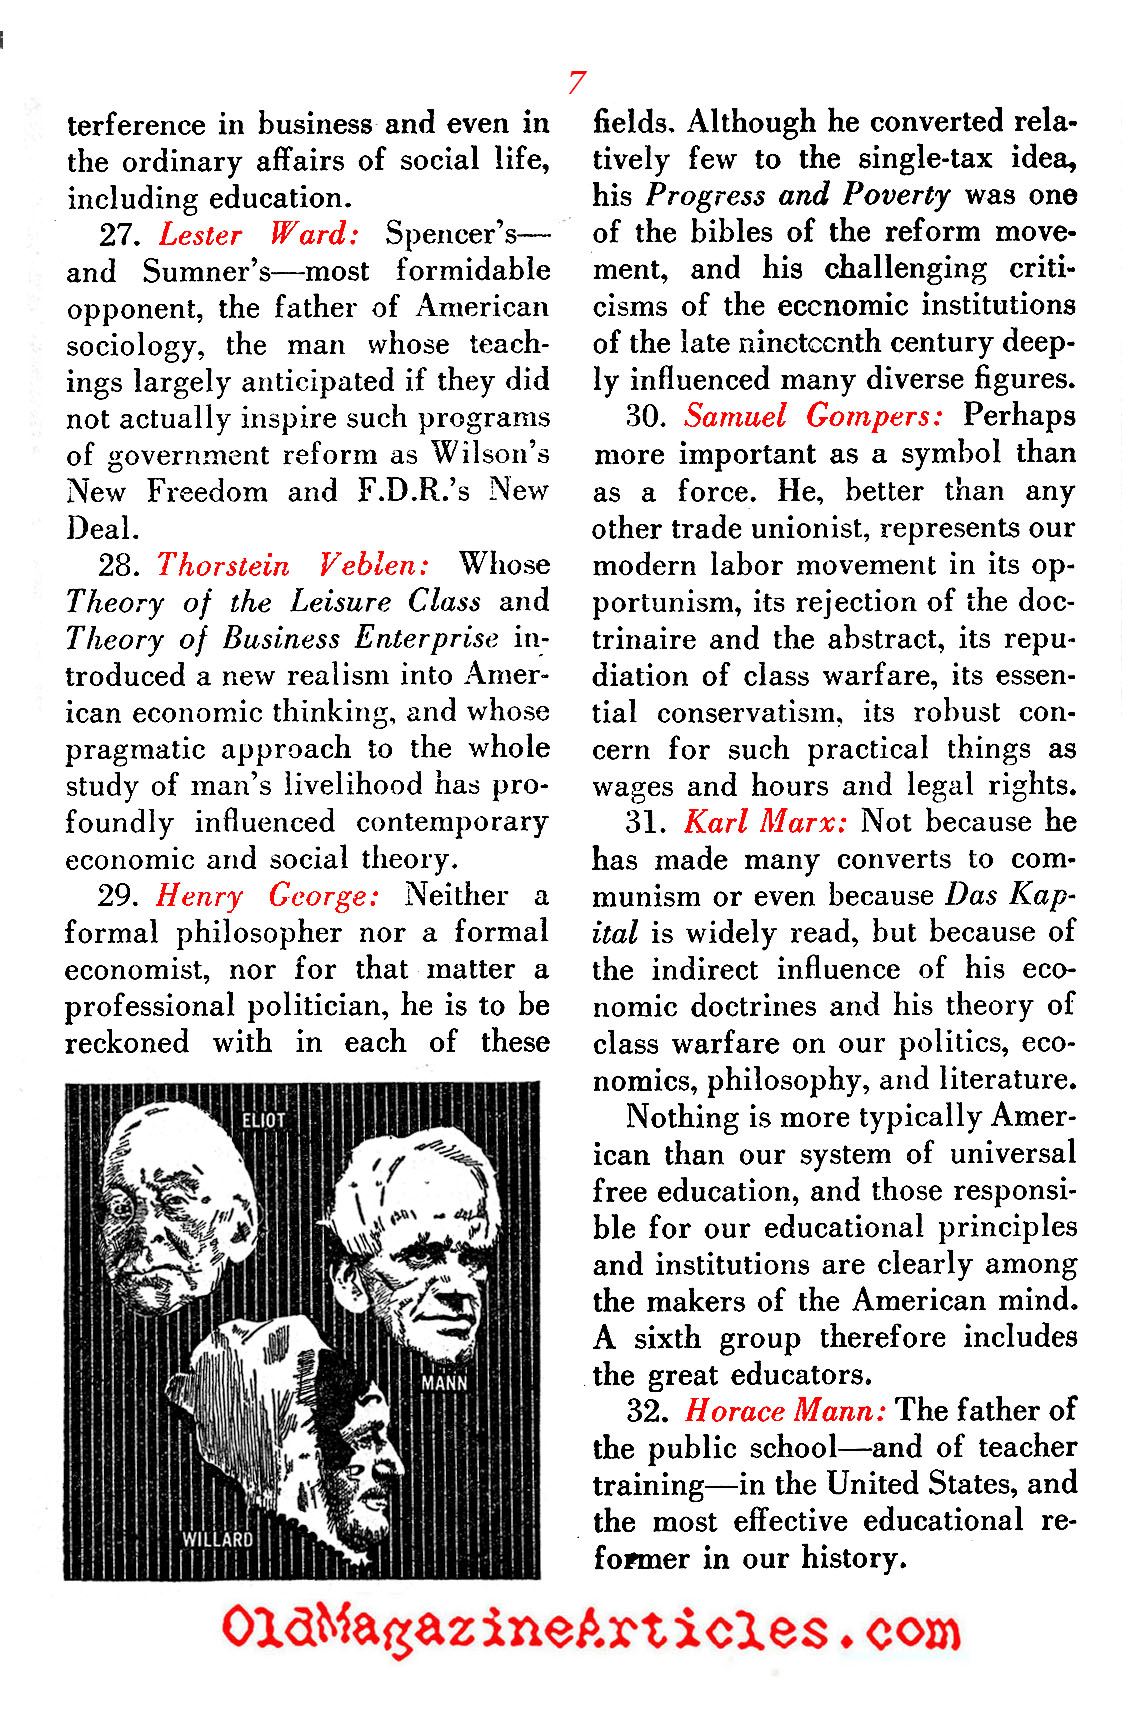 They Molded the American Mind ('48 Magazine, 1948)